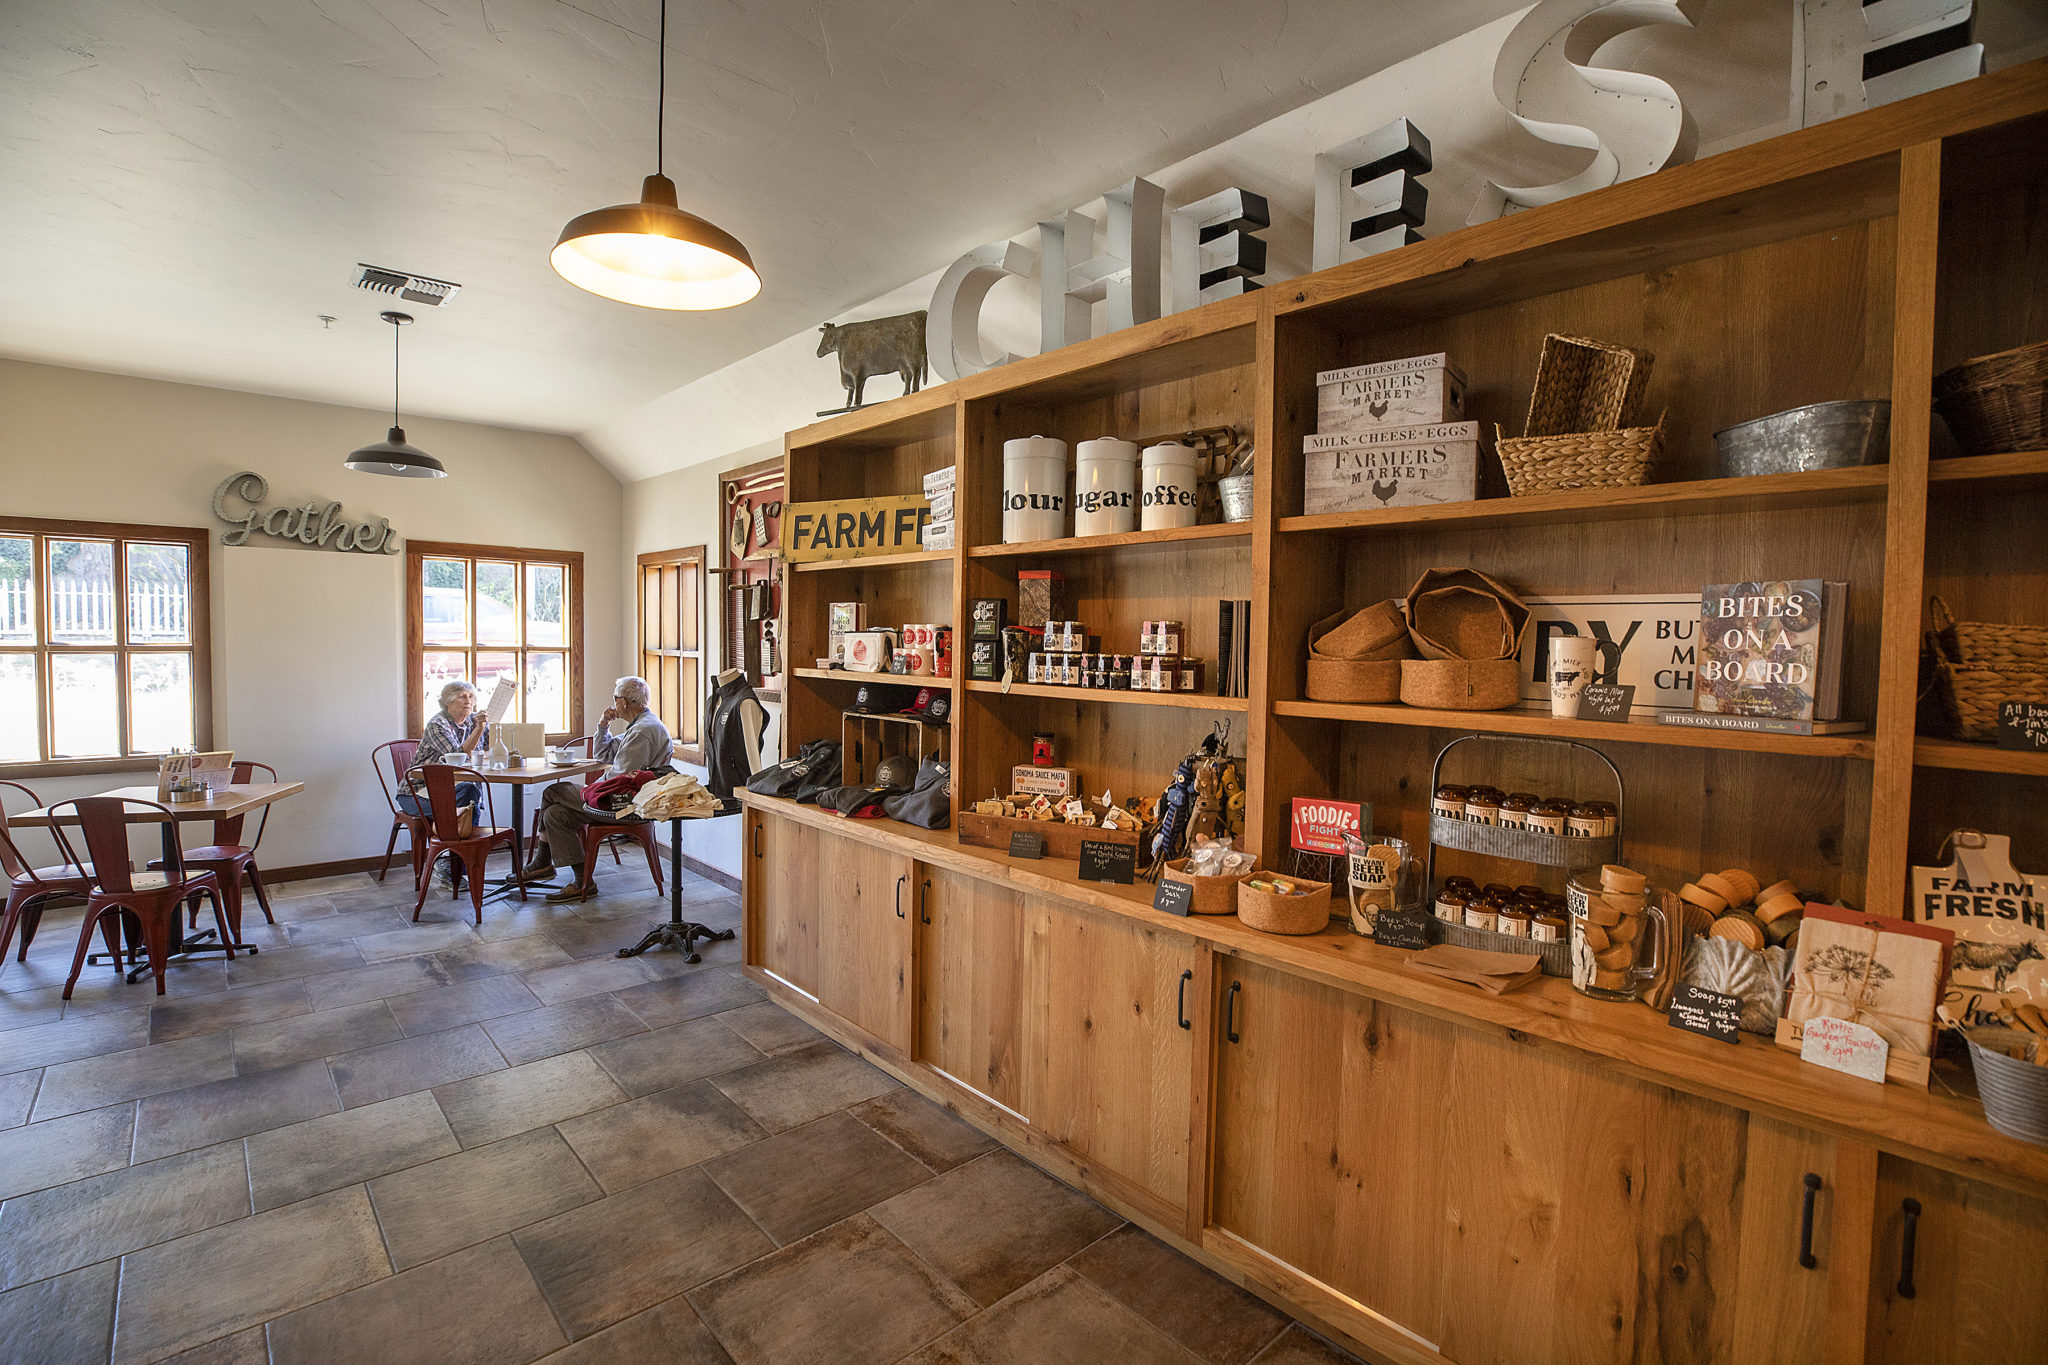 The Valley Ford Cheese & Creamery opened a new store with gifts, wines, pastries and breads and a breakfast and lunch menu featuring their cheese in the tiny west county village of Valley Ford. (John Burgess/The Press Democrat)